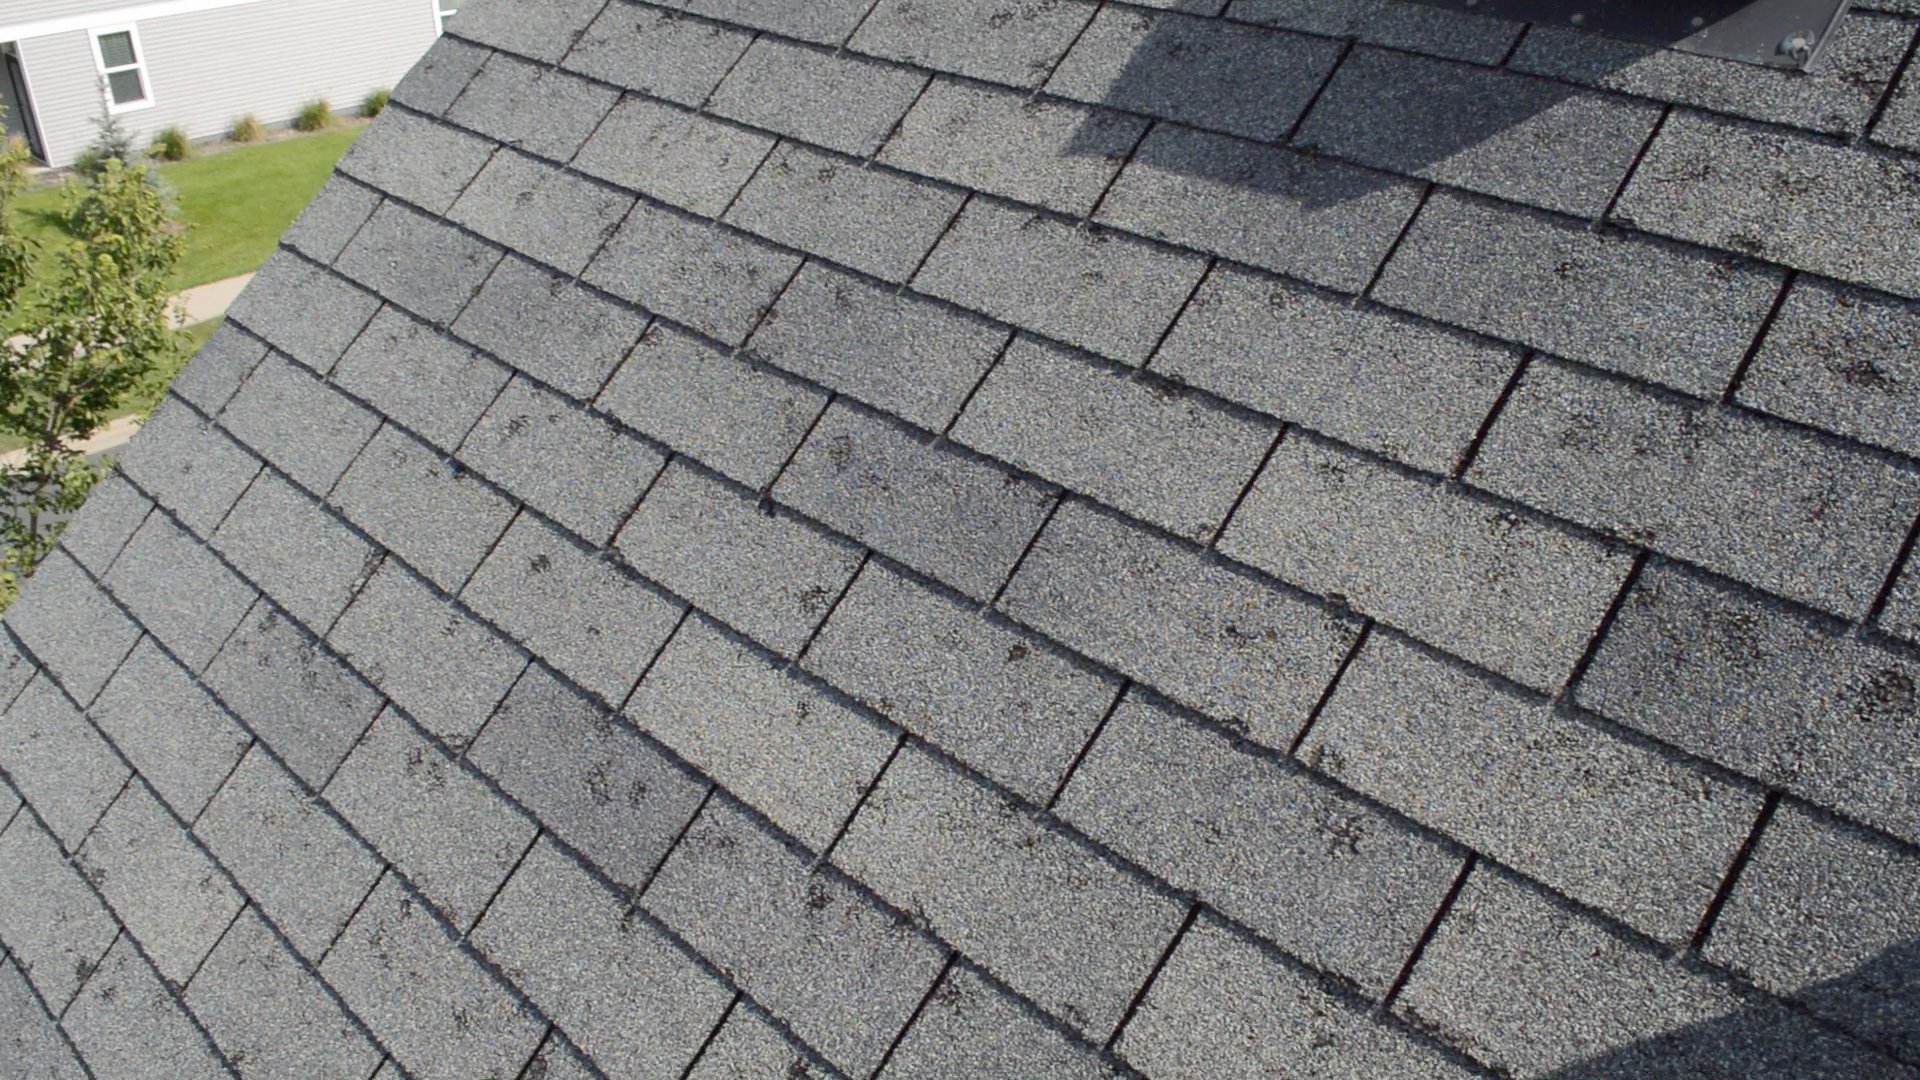 How do I know if I need a roof repair or replacement?